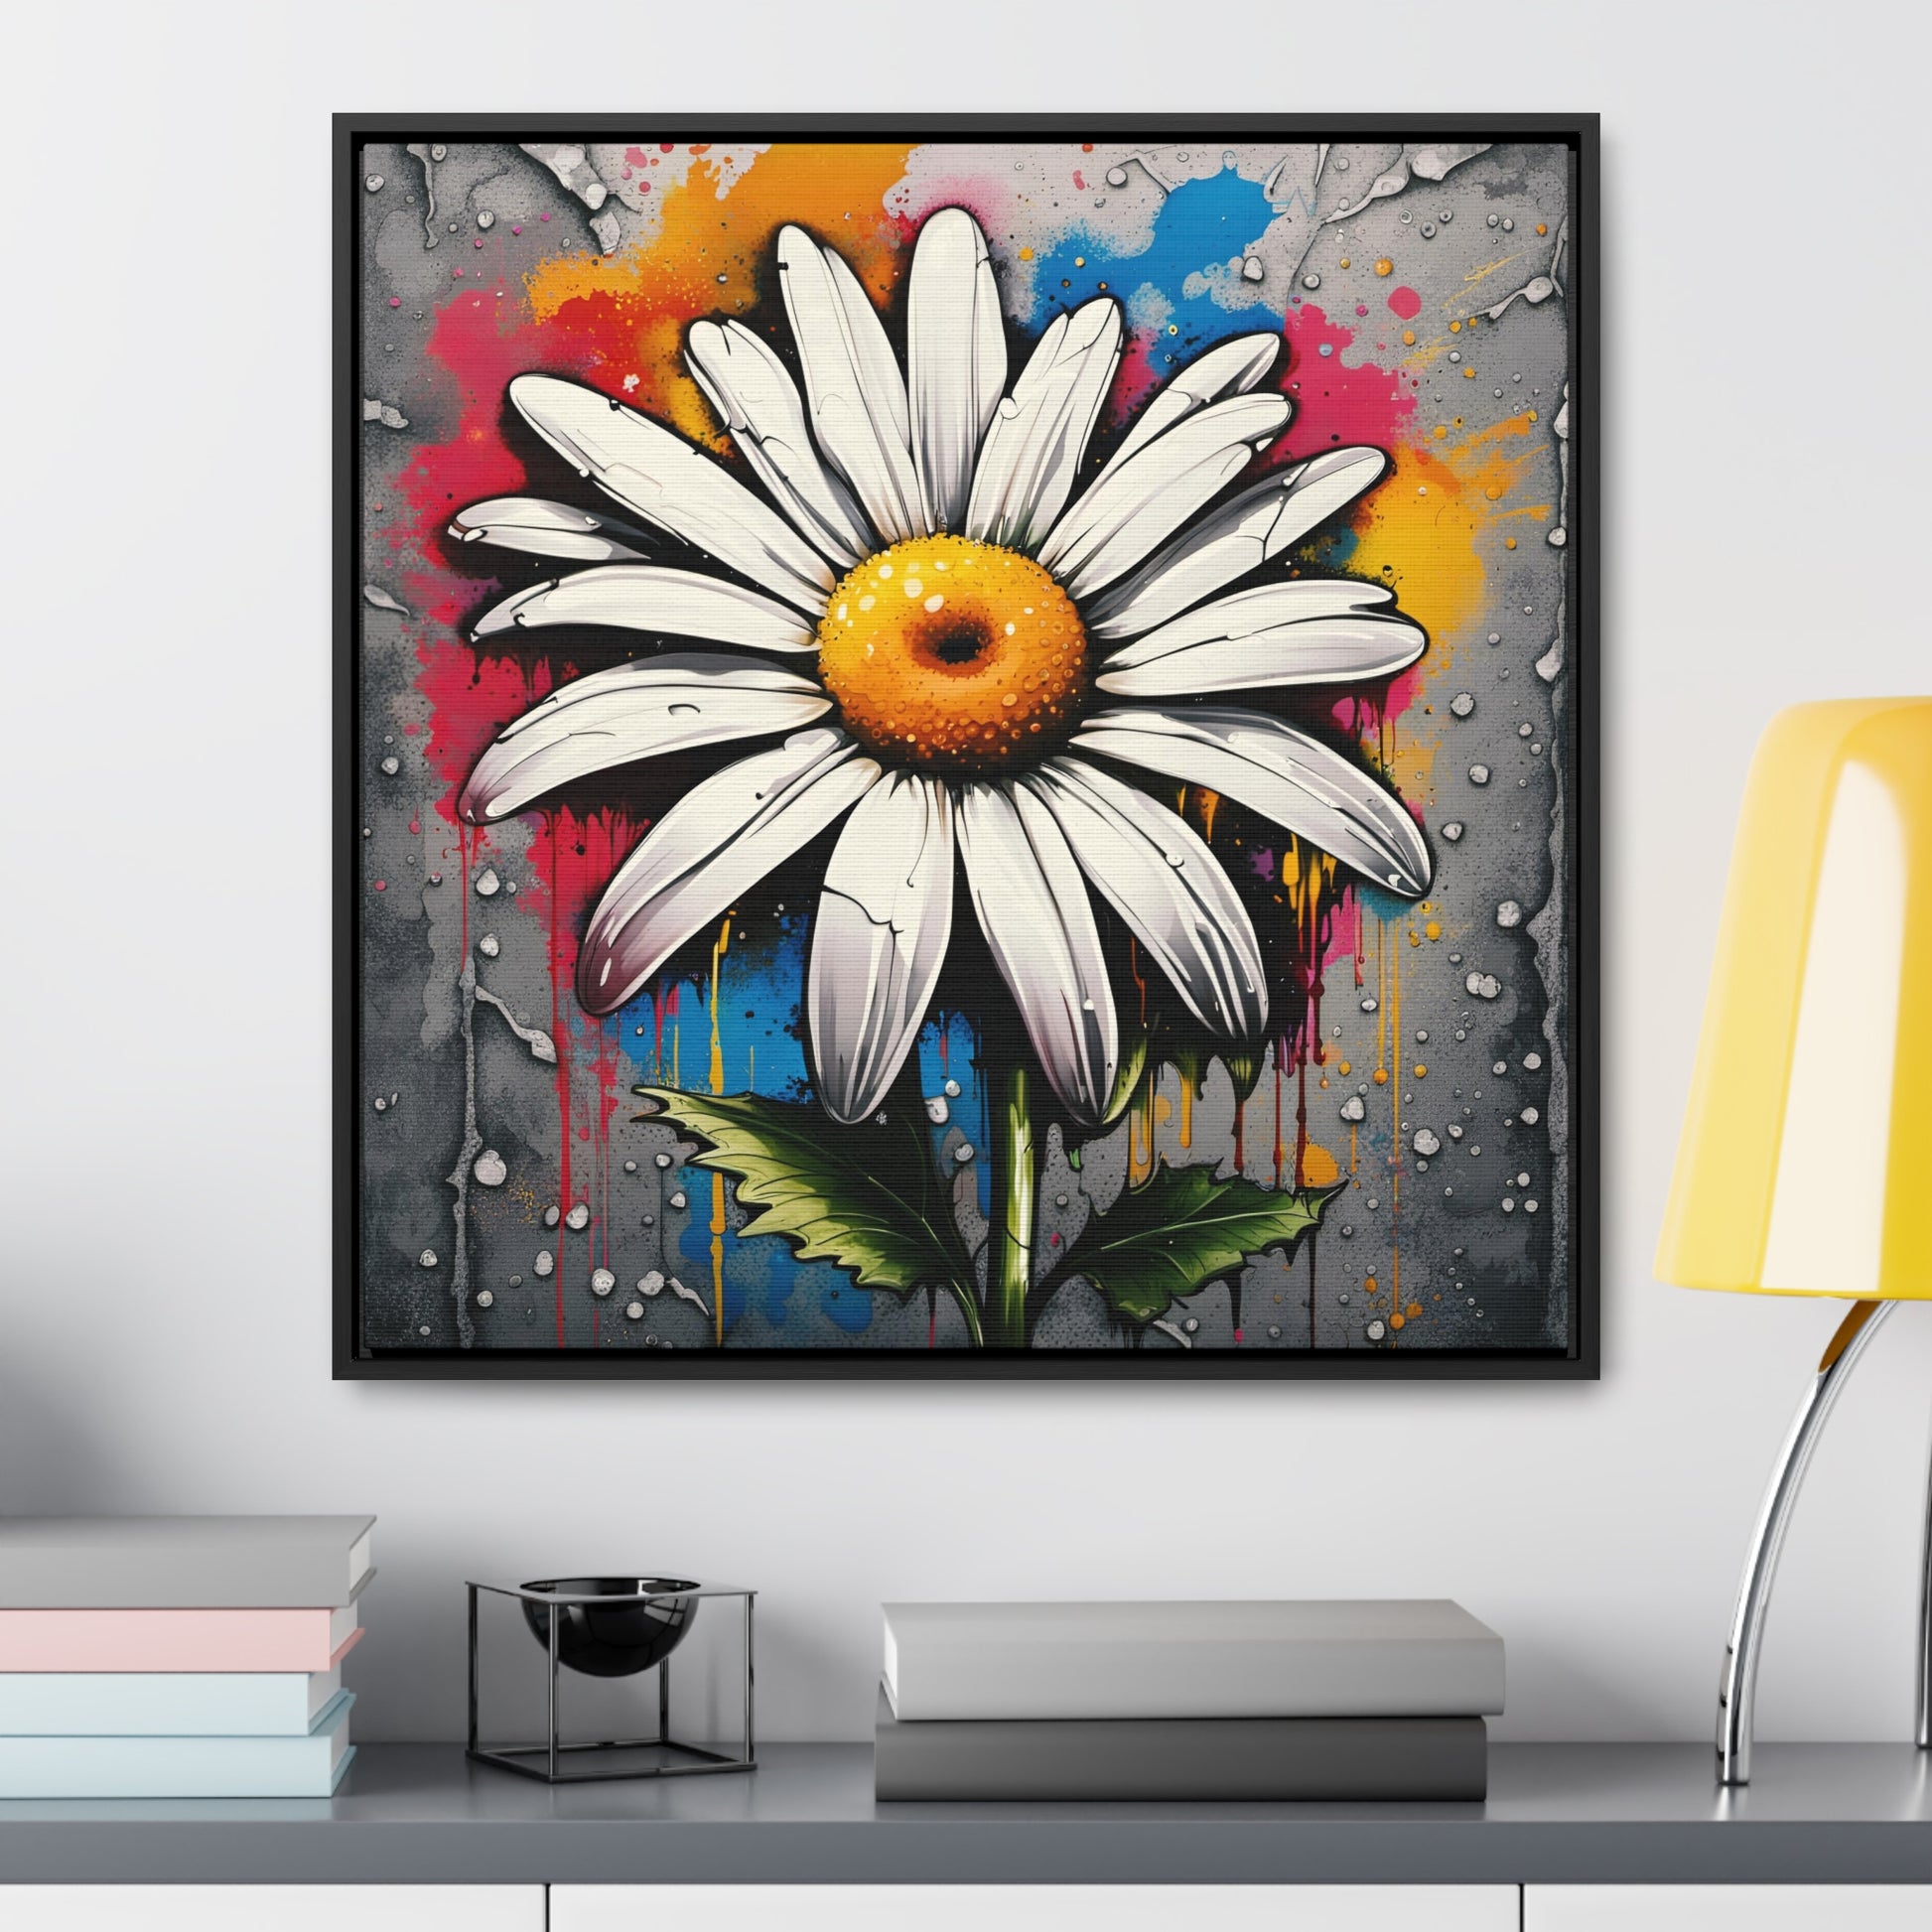 Floral themed Wall Art Print - Street Art Style Graffiti Daisy Printed on Canvas in a Floating Frame 24x24